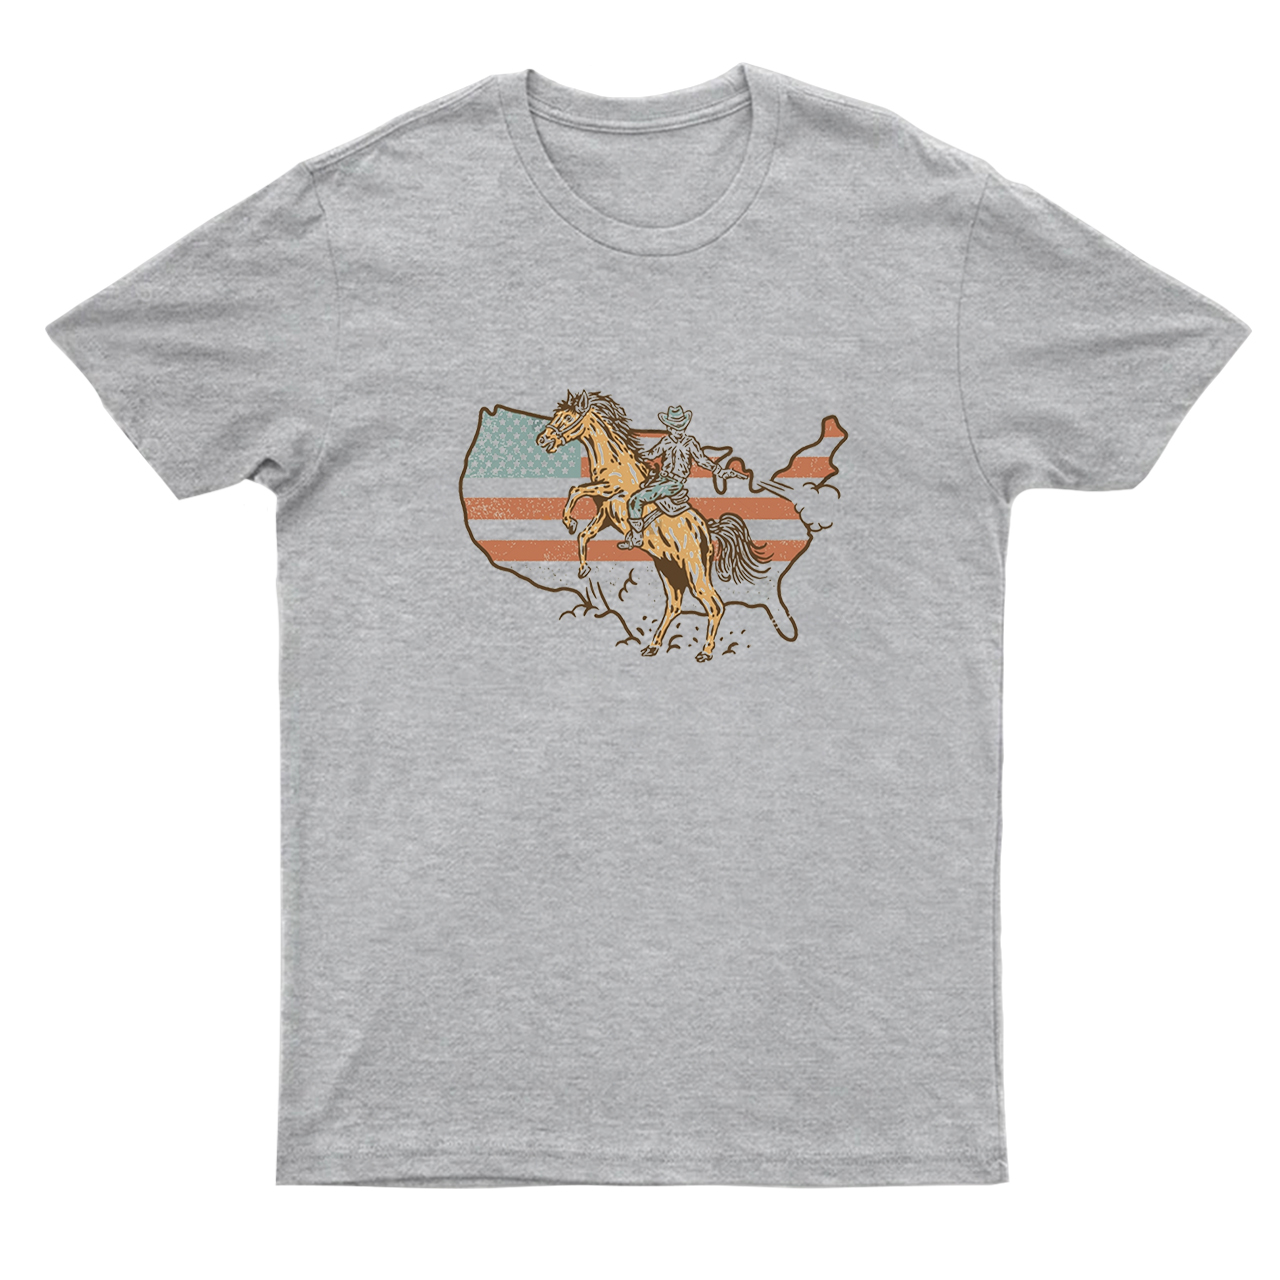 American Cowboys Gallop on the Battlefield T-Shirts